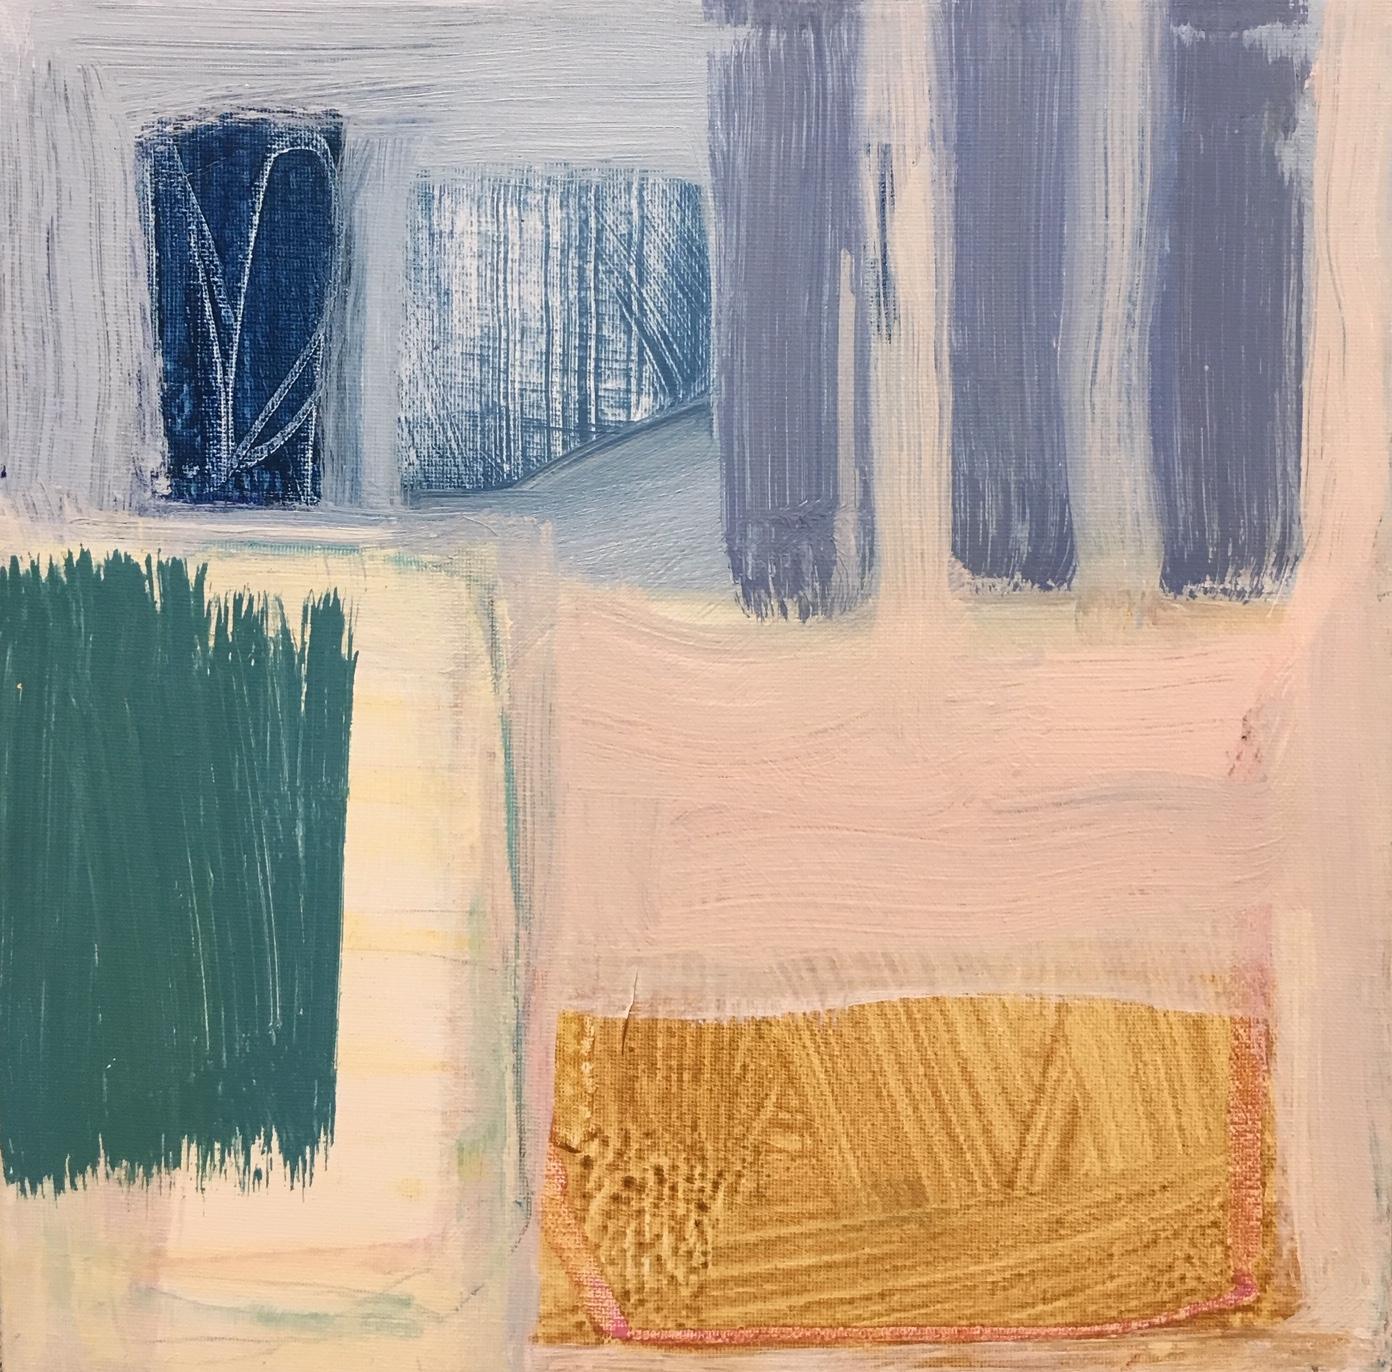 'Walk by the Sea' is a petite abstract acrylic and mixed media on canvas painting created by American artist Ellen Rolli in 2019. Featuring a palette mostly made of blue, light pink, ocher, grey and green, tones, the painting exudes an impression of